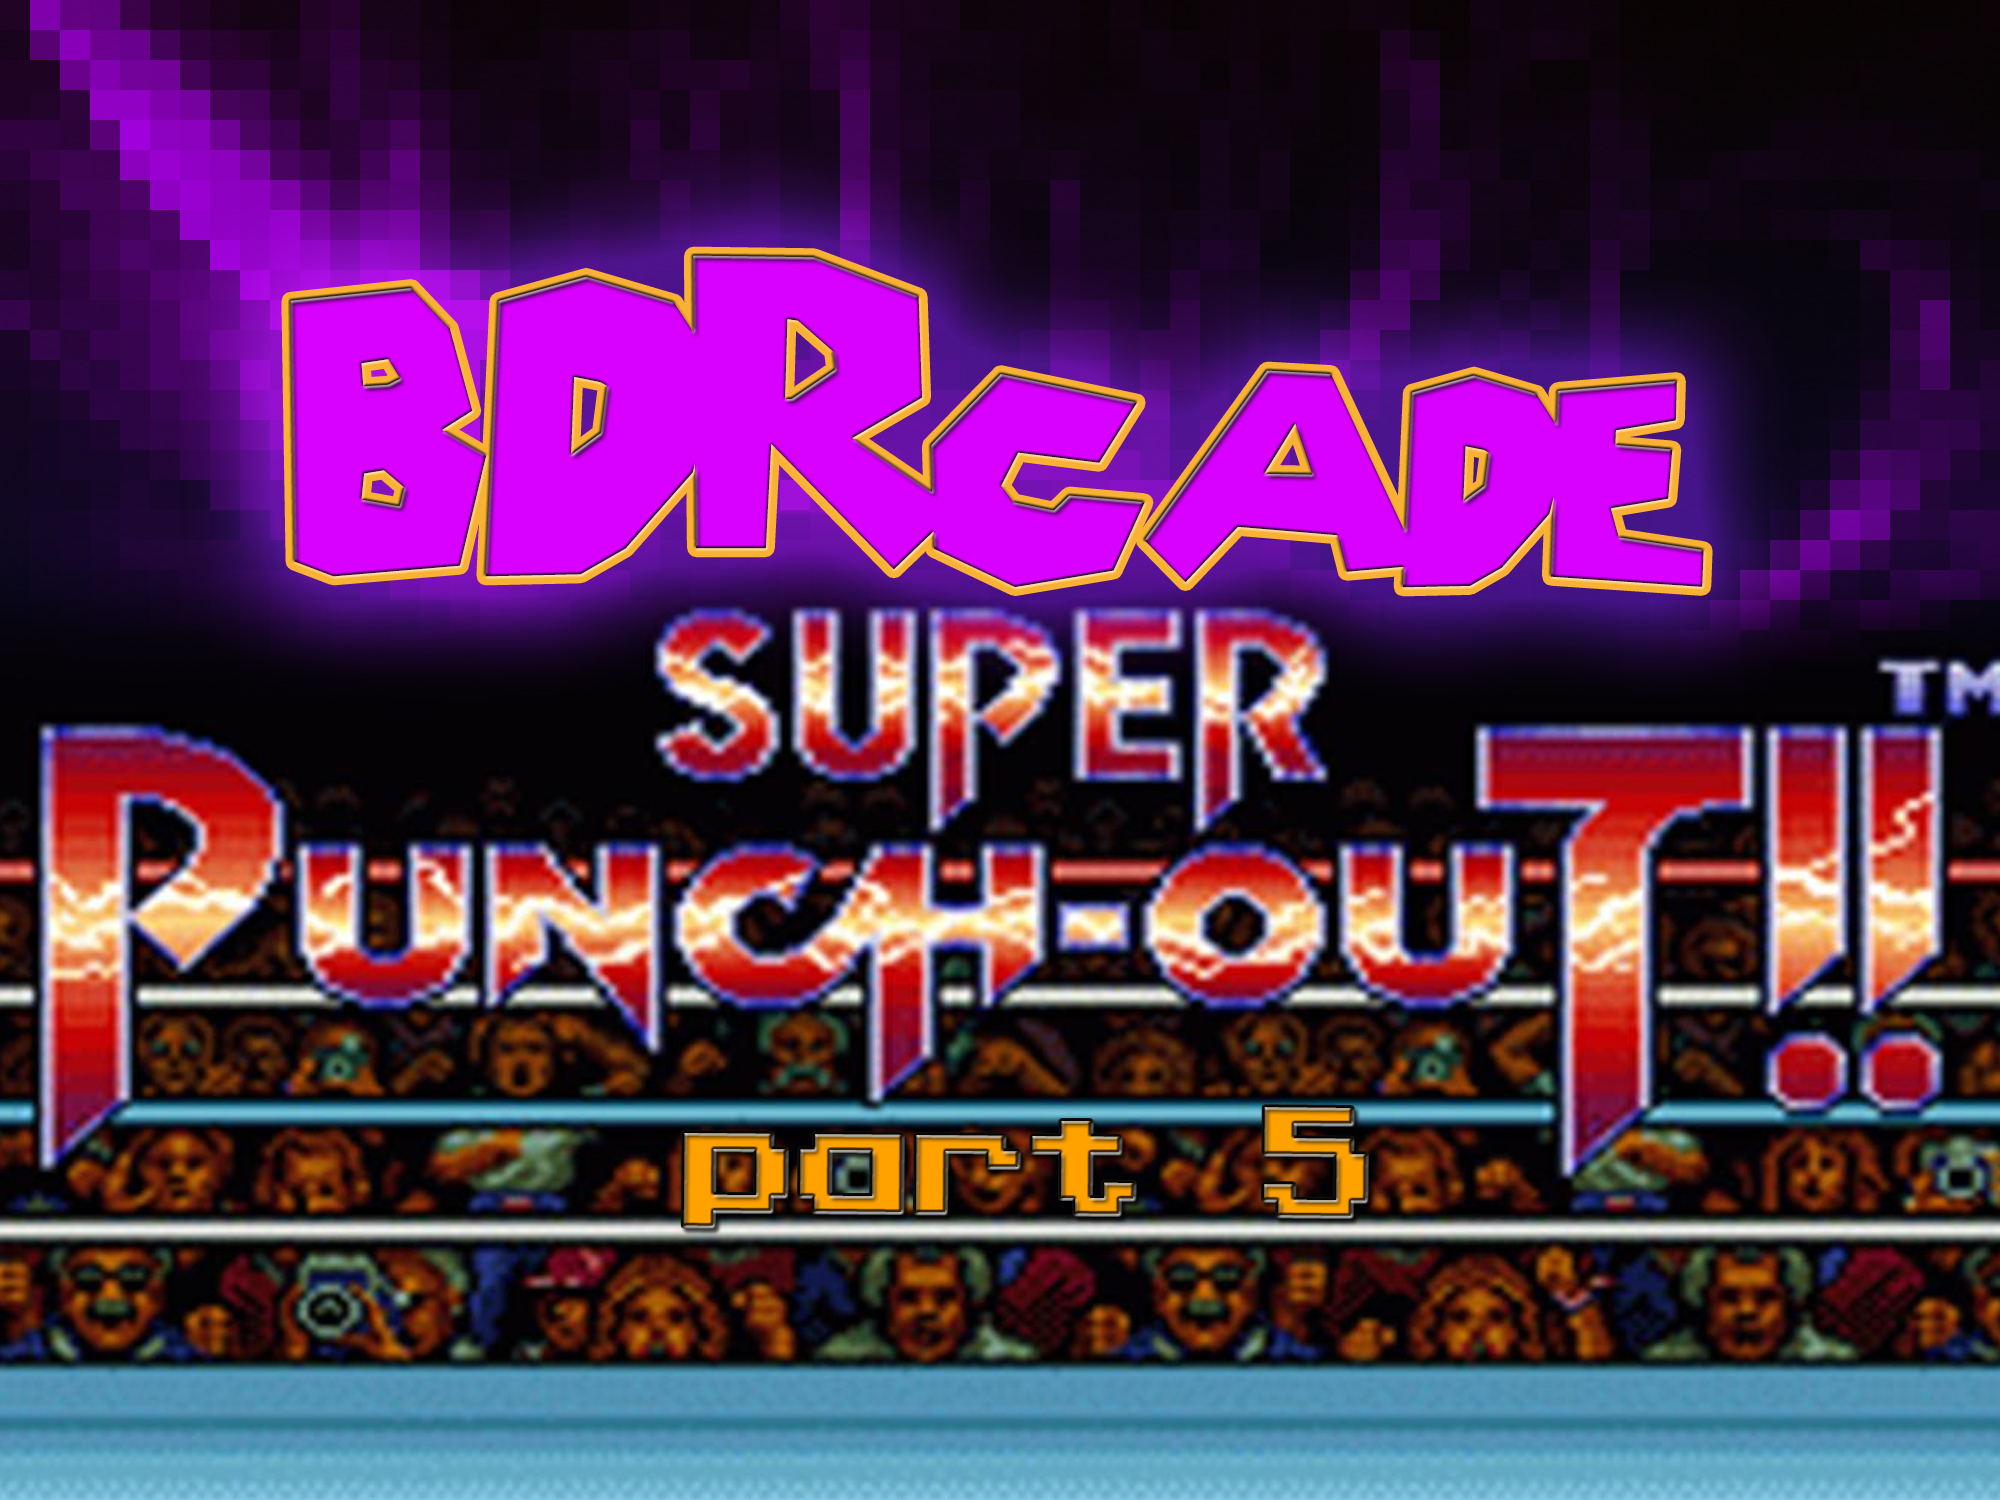 Super Punch-Out: Don’t Call it a Comeback! – PART 5 – BDRcade